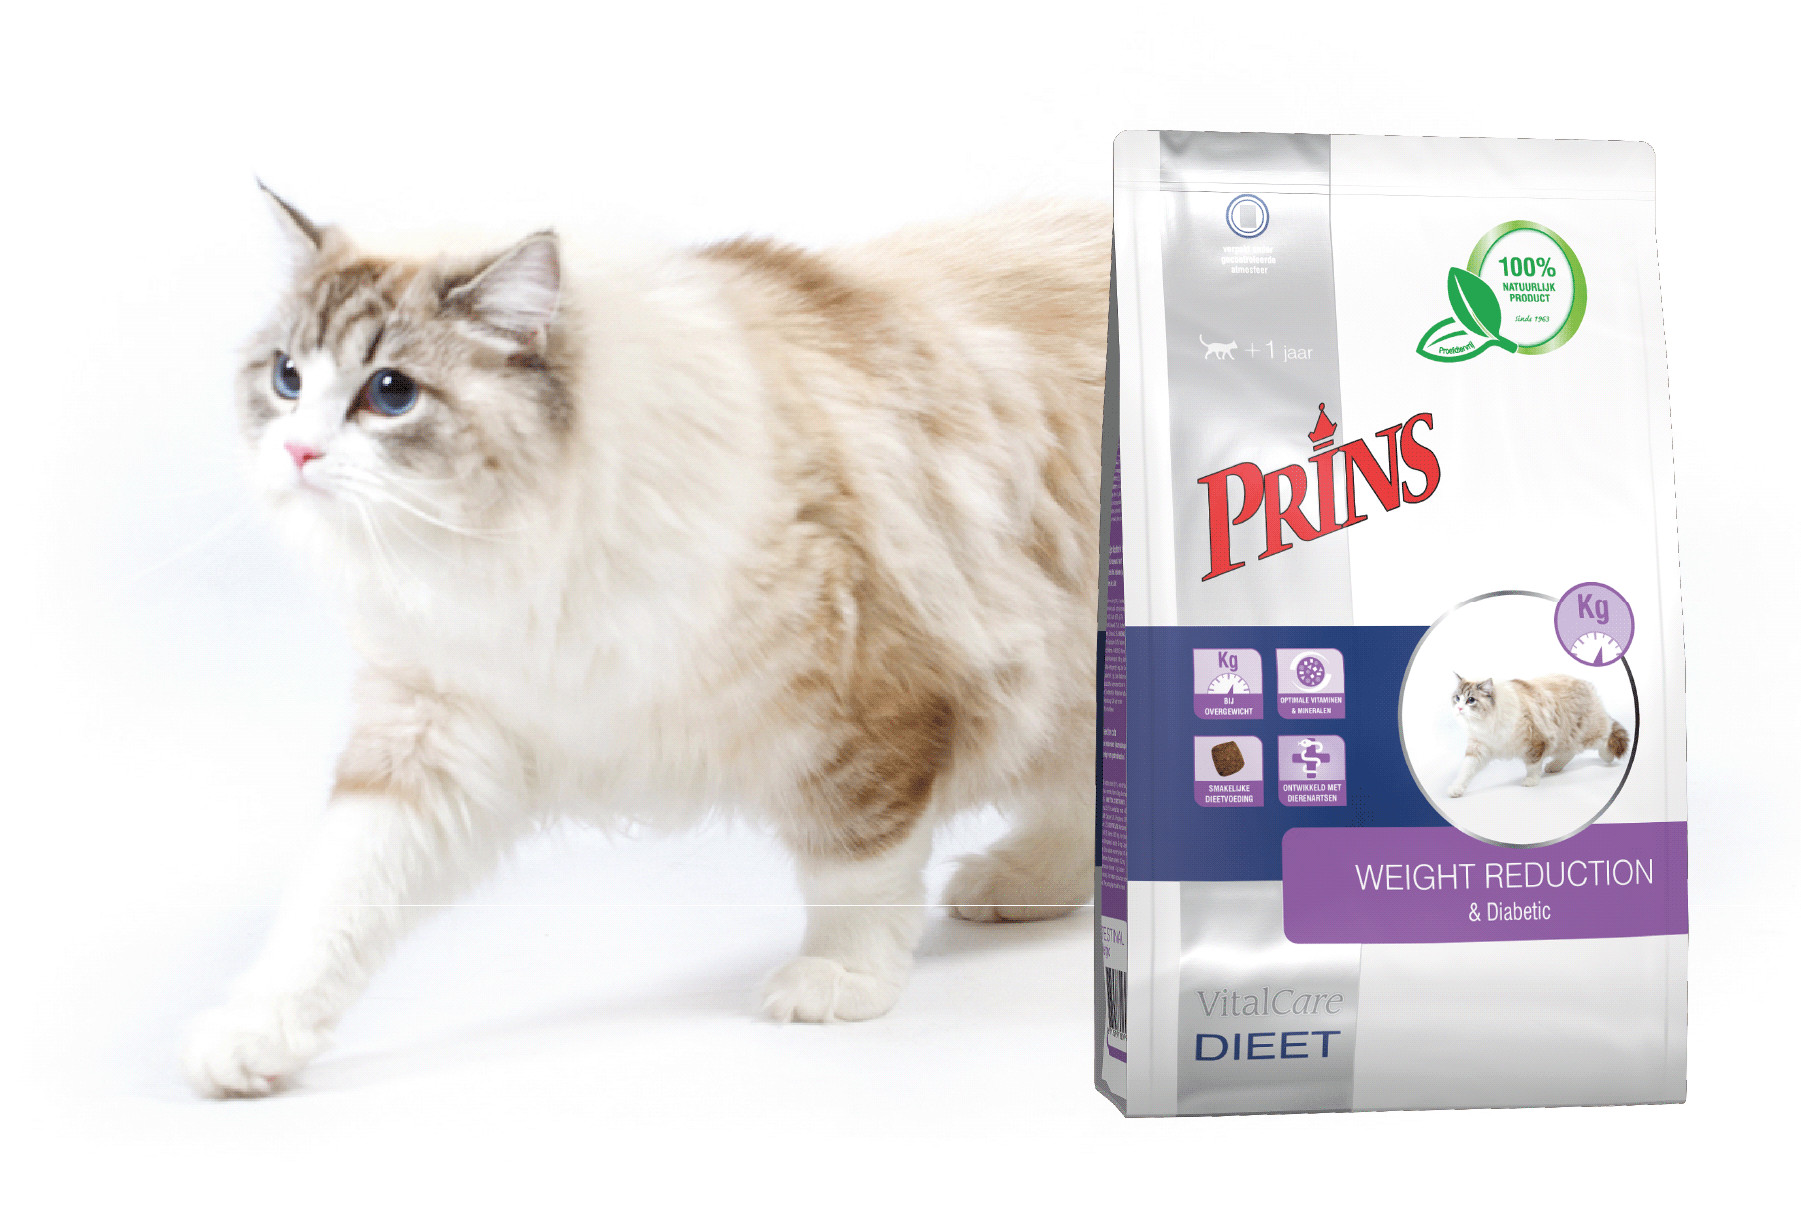 Prins Vitalcare Diet Weight Reduction & Diabetic pour chat